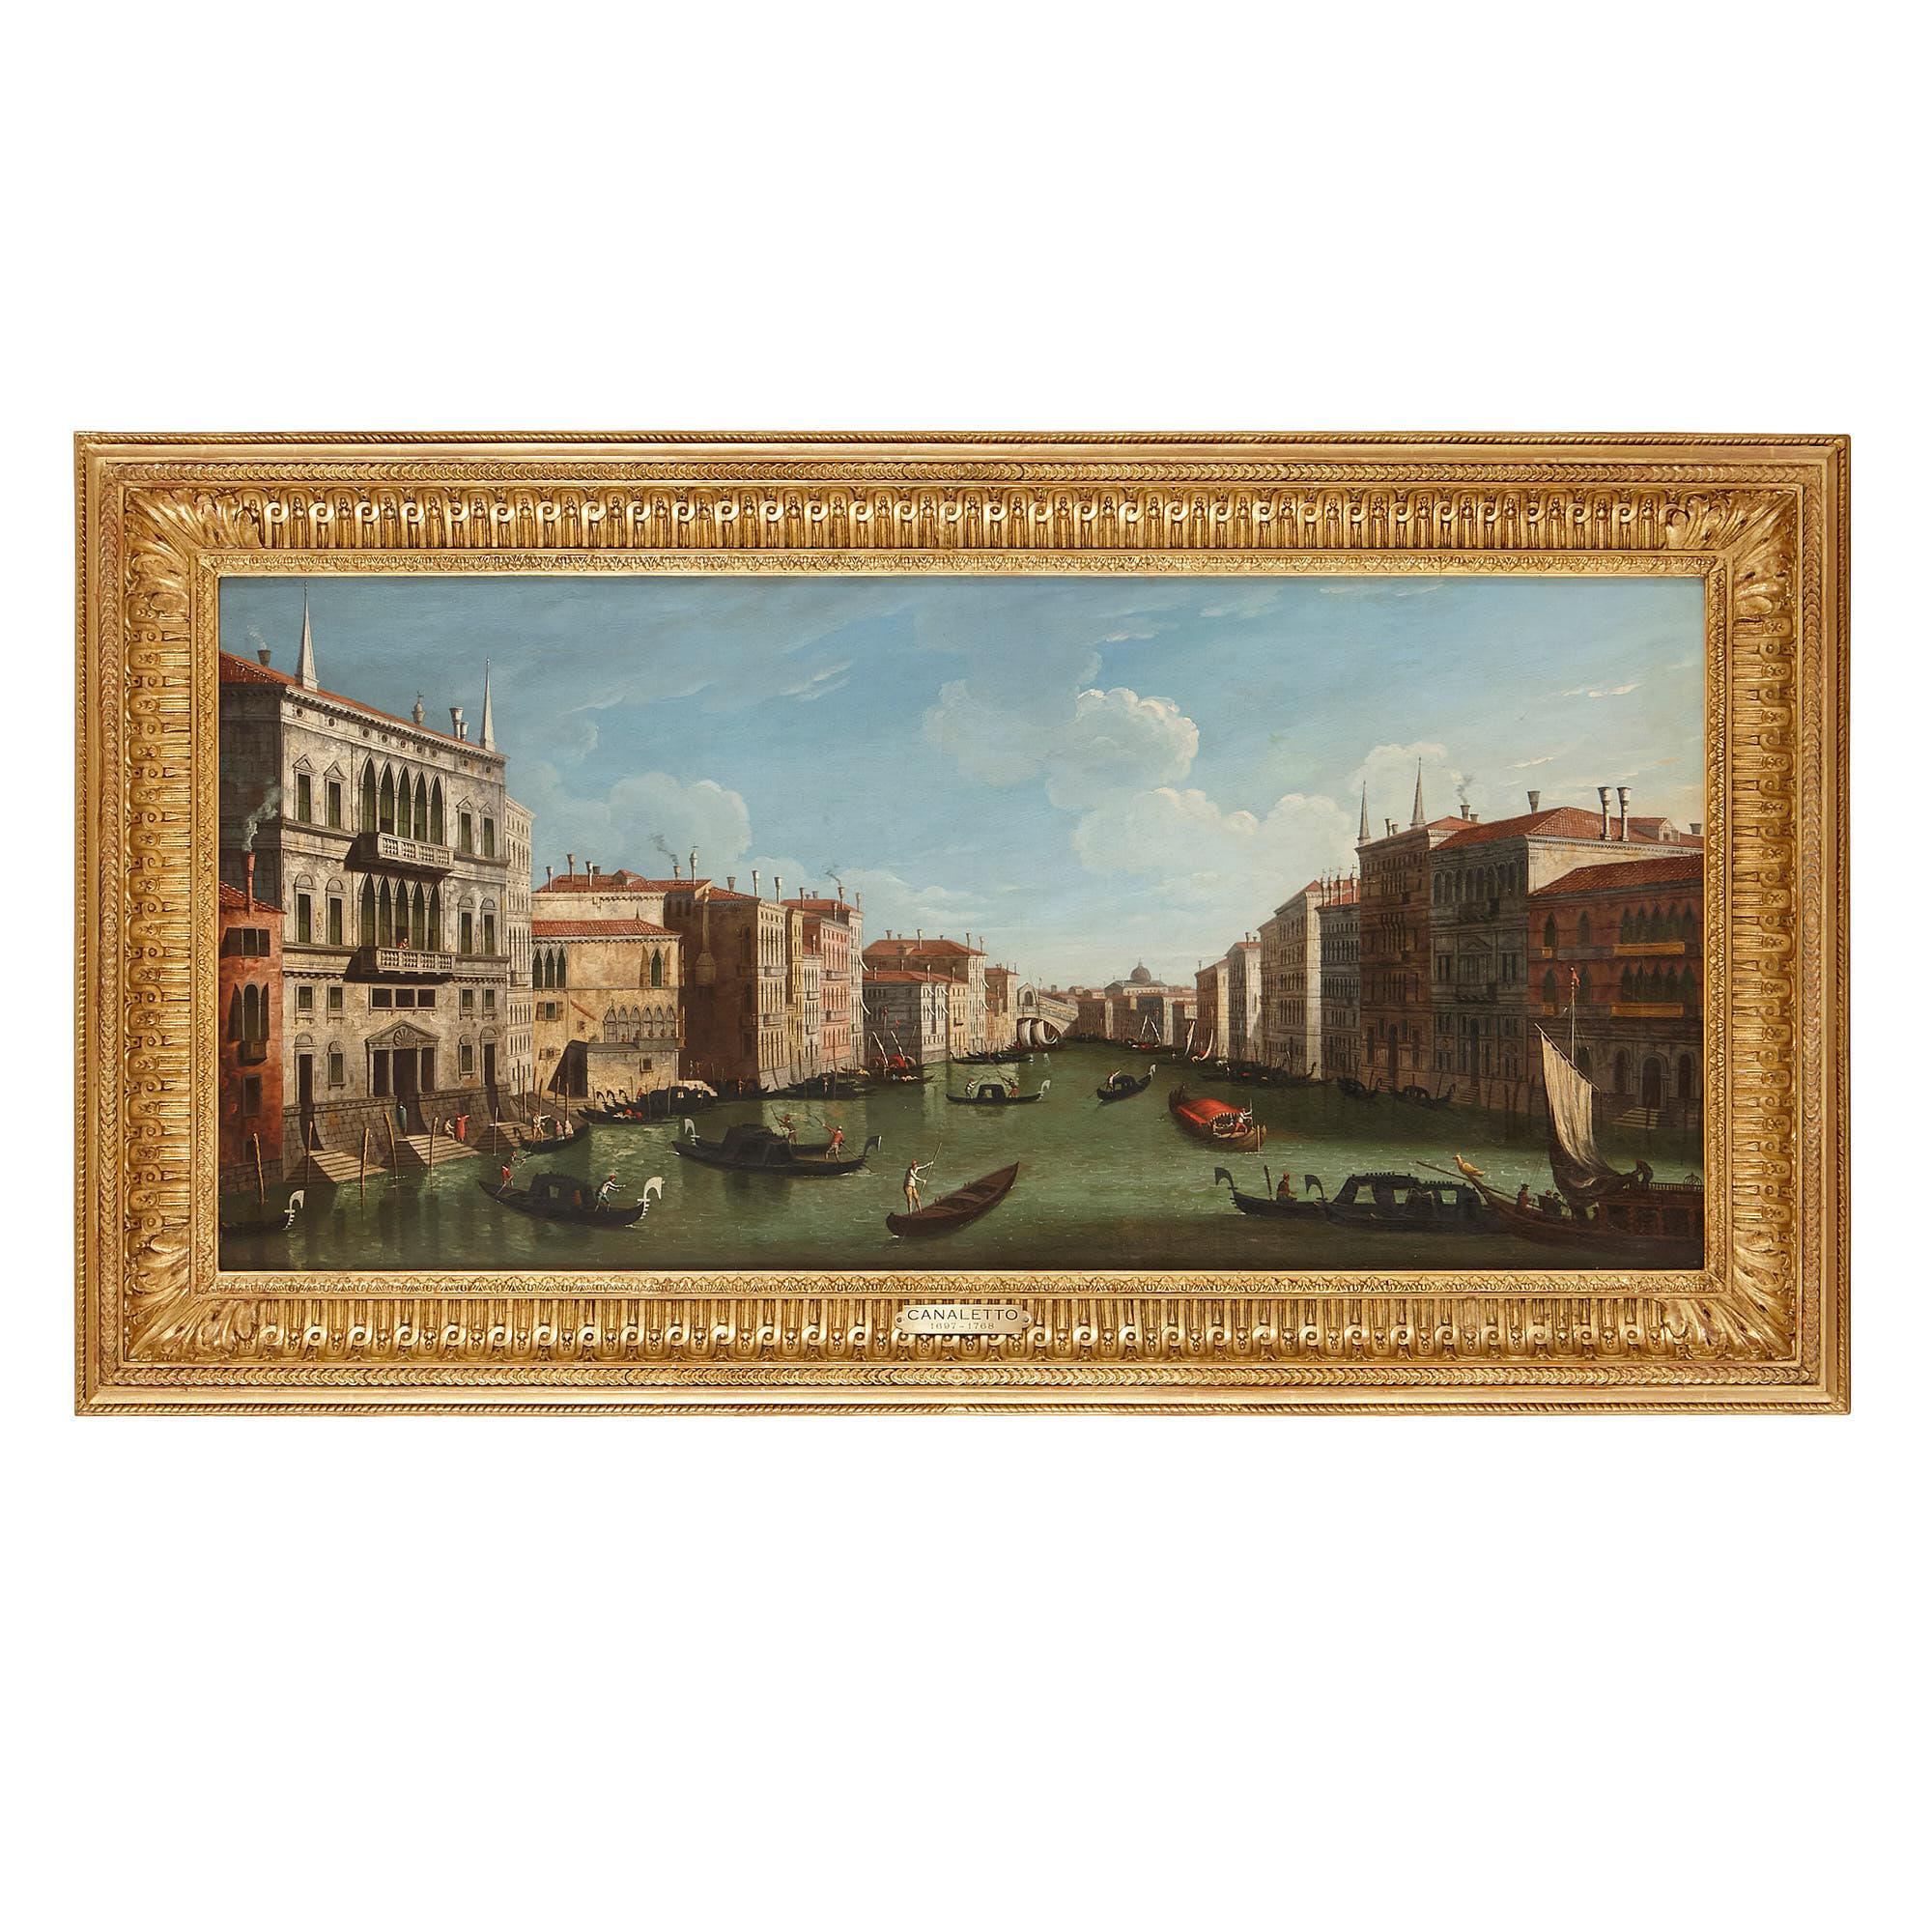 These beautiful paintings were created in England in c.1780, by the school of Canaletto. Born ‘Giovanni Antonio Canal’, Canaletto, as he was widely-known, was an 18th Century Venetian painter, who was famous for his ‘vedute’ (views) of Venice. These